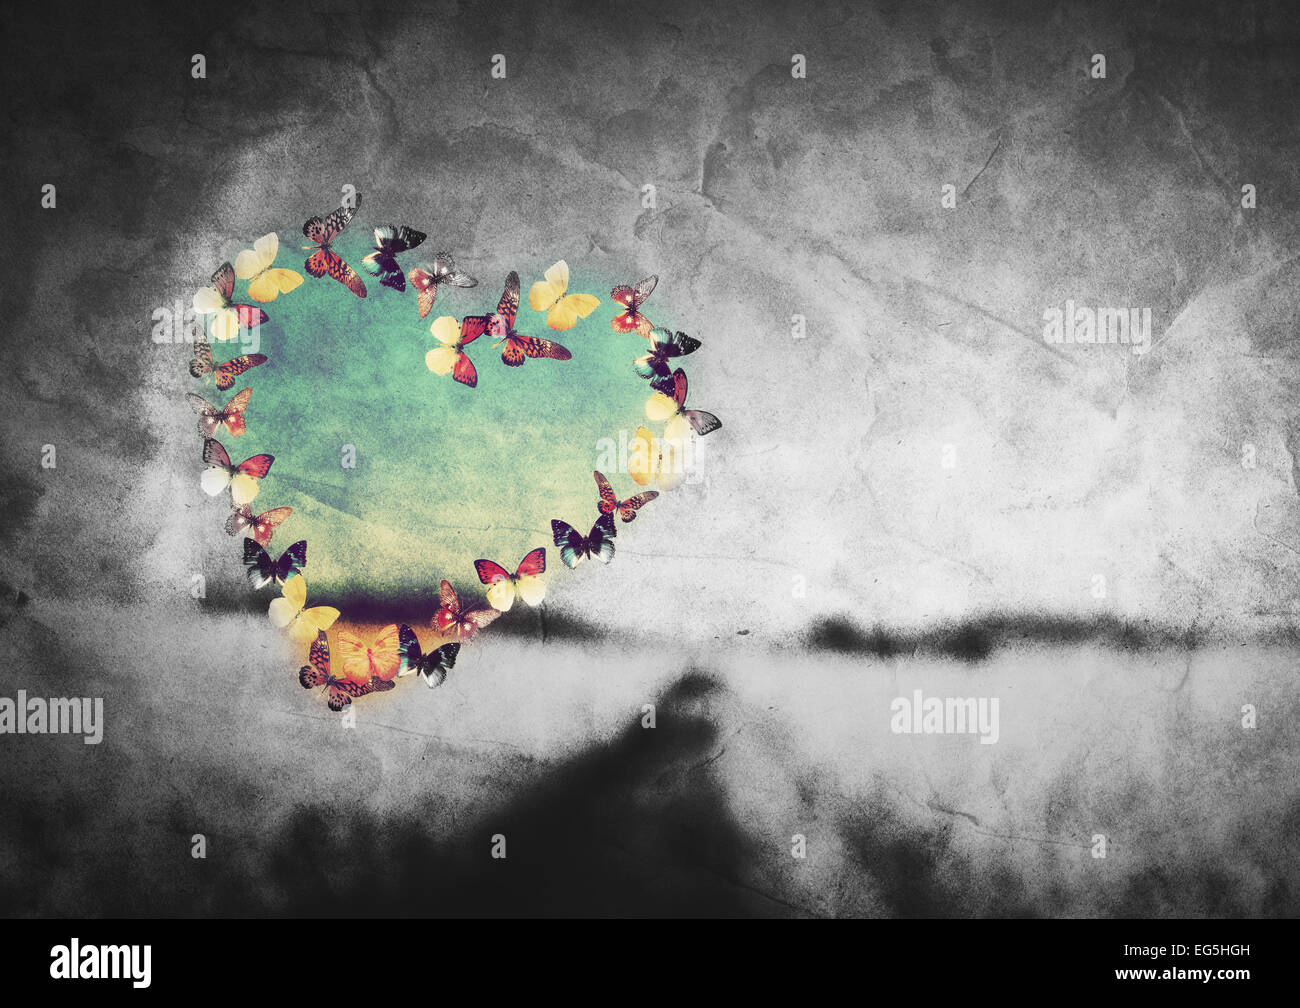 Heart shape made of colorful butterflies on black and white field vintage background. Love, hope concept. Stock Photo